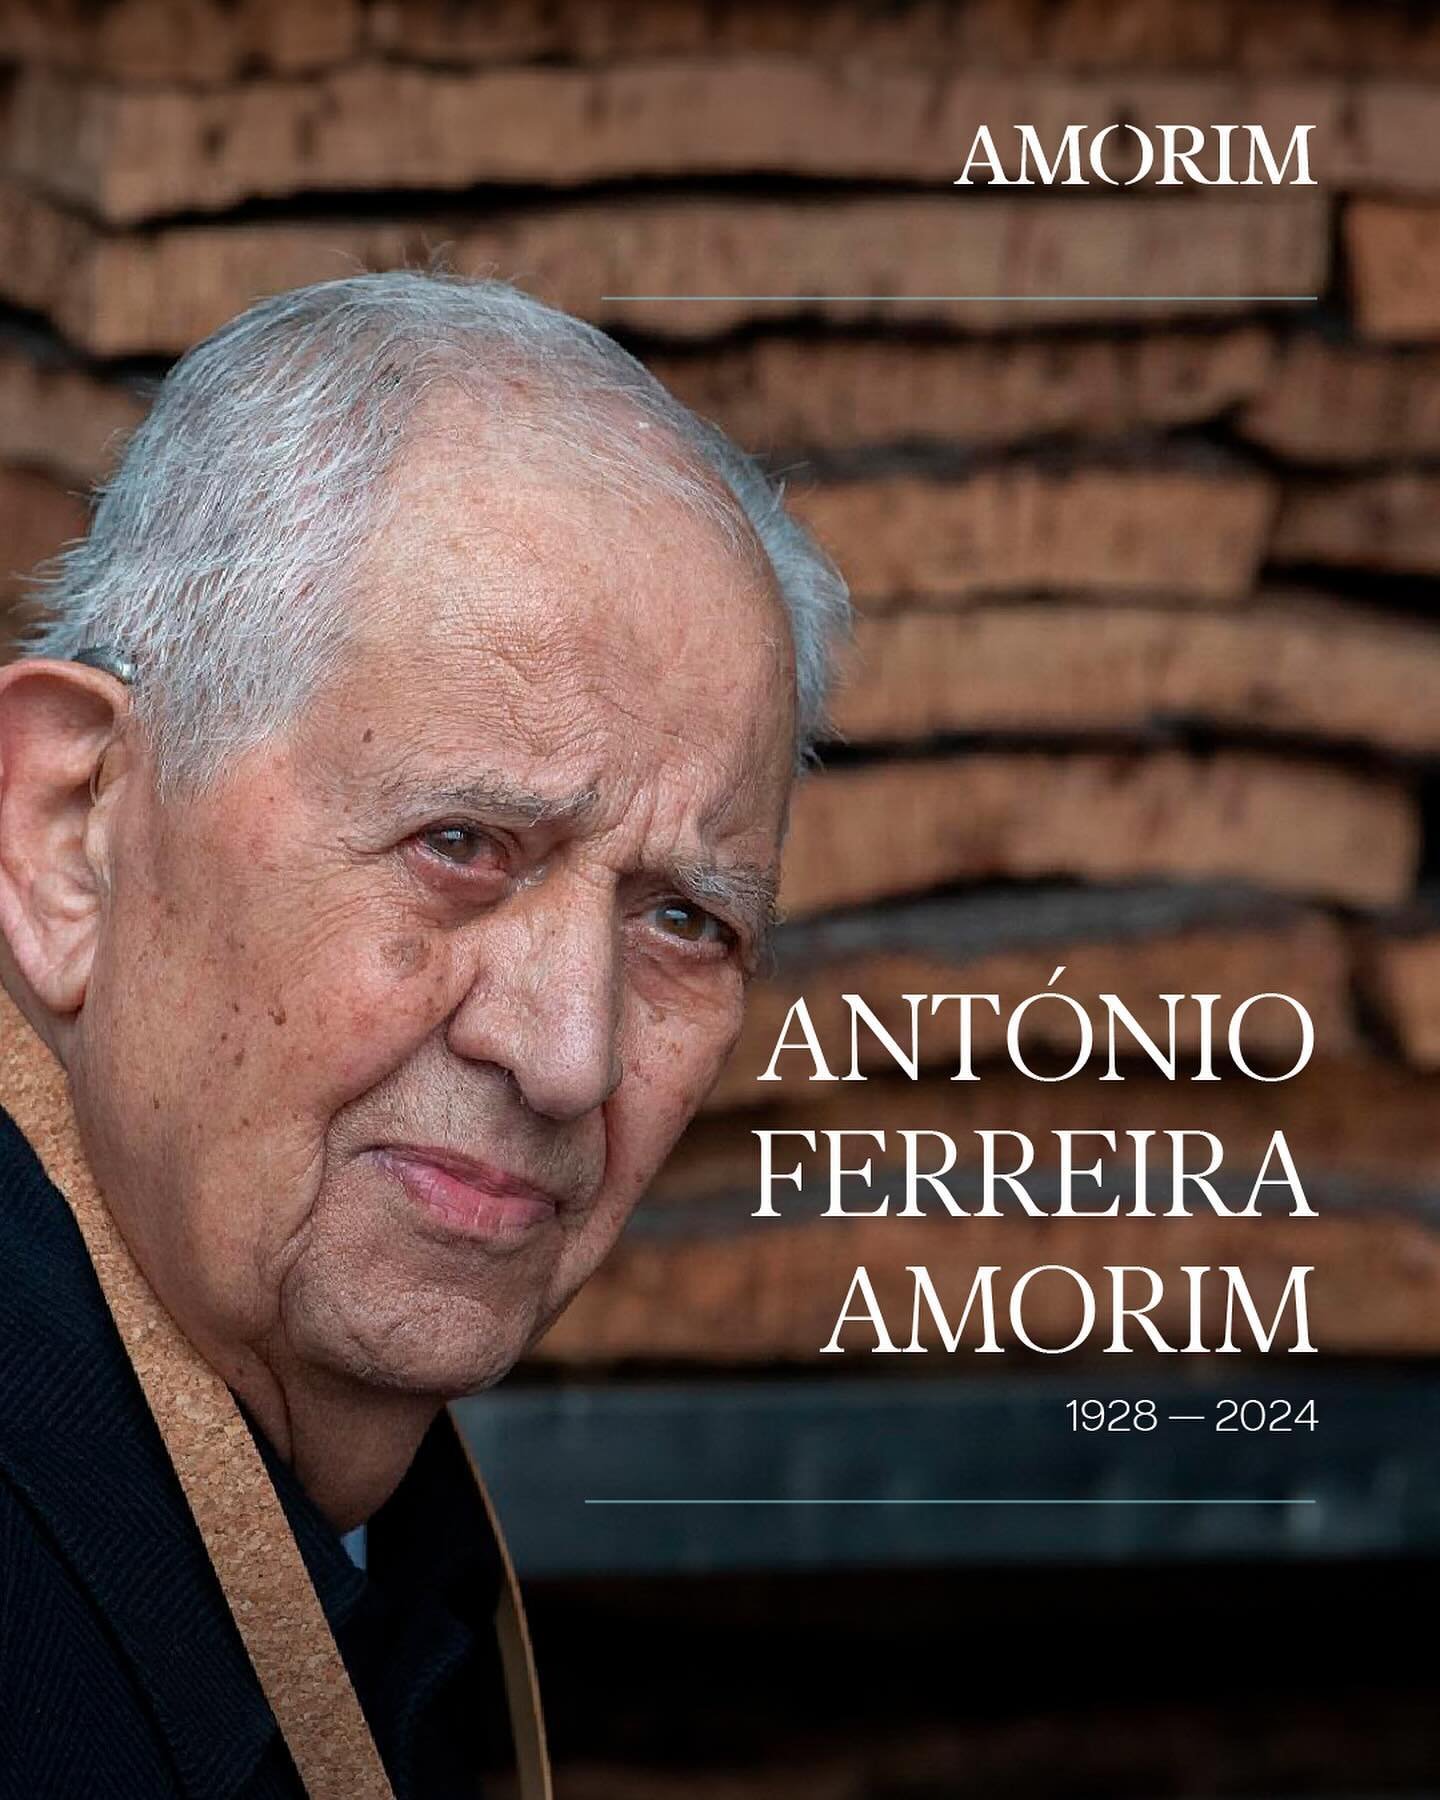 We deeply mourn the passing of Ant&oacute;nio Ferreira Amorim. He devoted his life to advancing the cork industry, distinguished by his fearless leadership, and profound commitment to our people and our planet. He leaves behind a lasting legacy of de